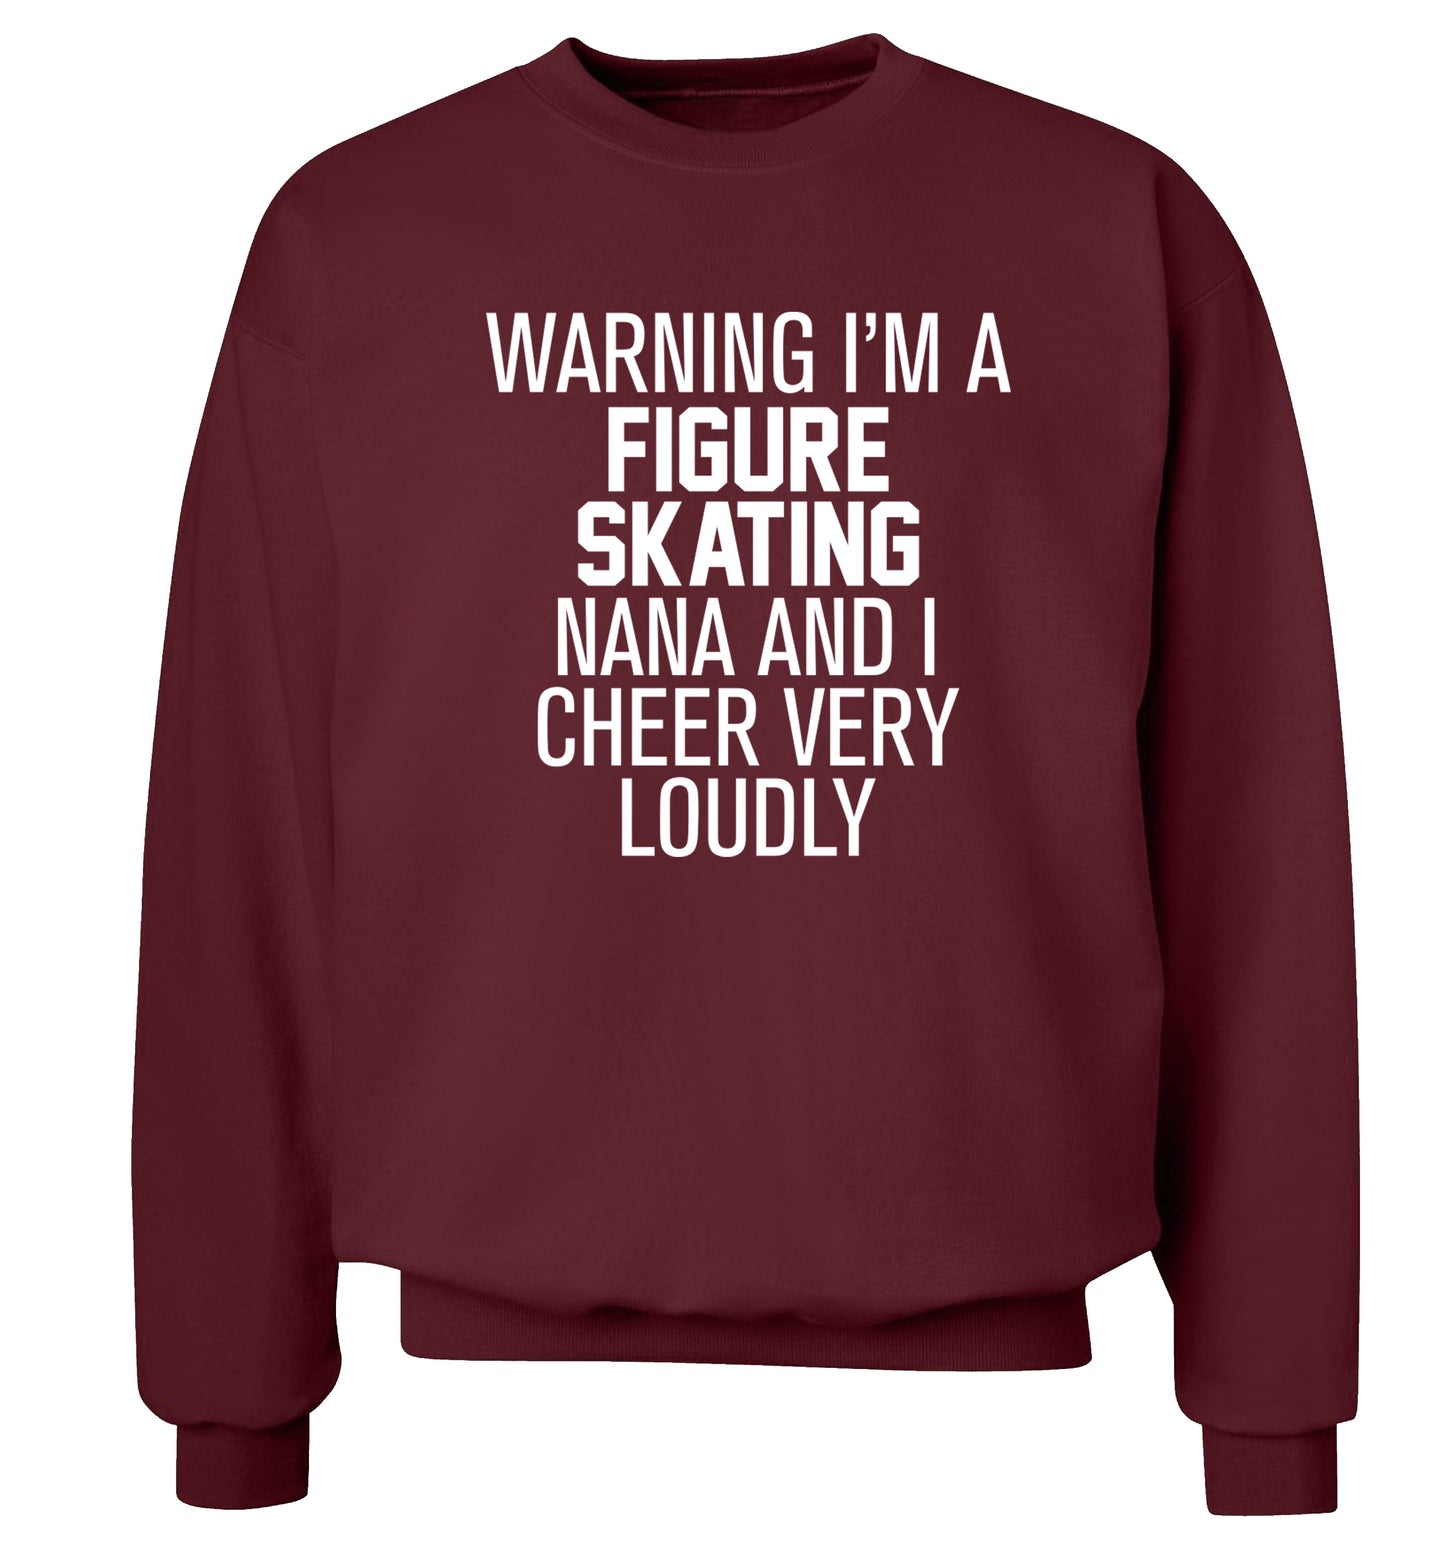 Warning I'm a figure skating nana and I cheer very loudly Adult's unisexmaroon Sweater 2XL